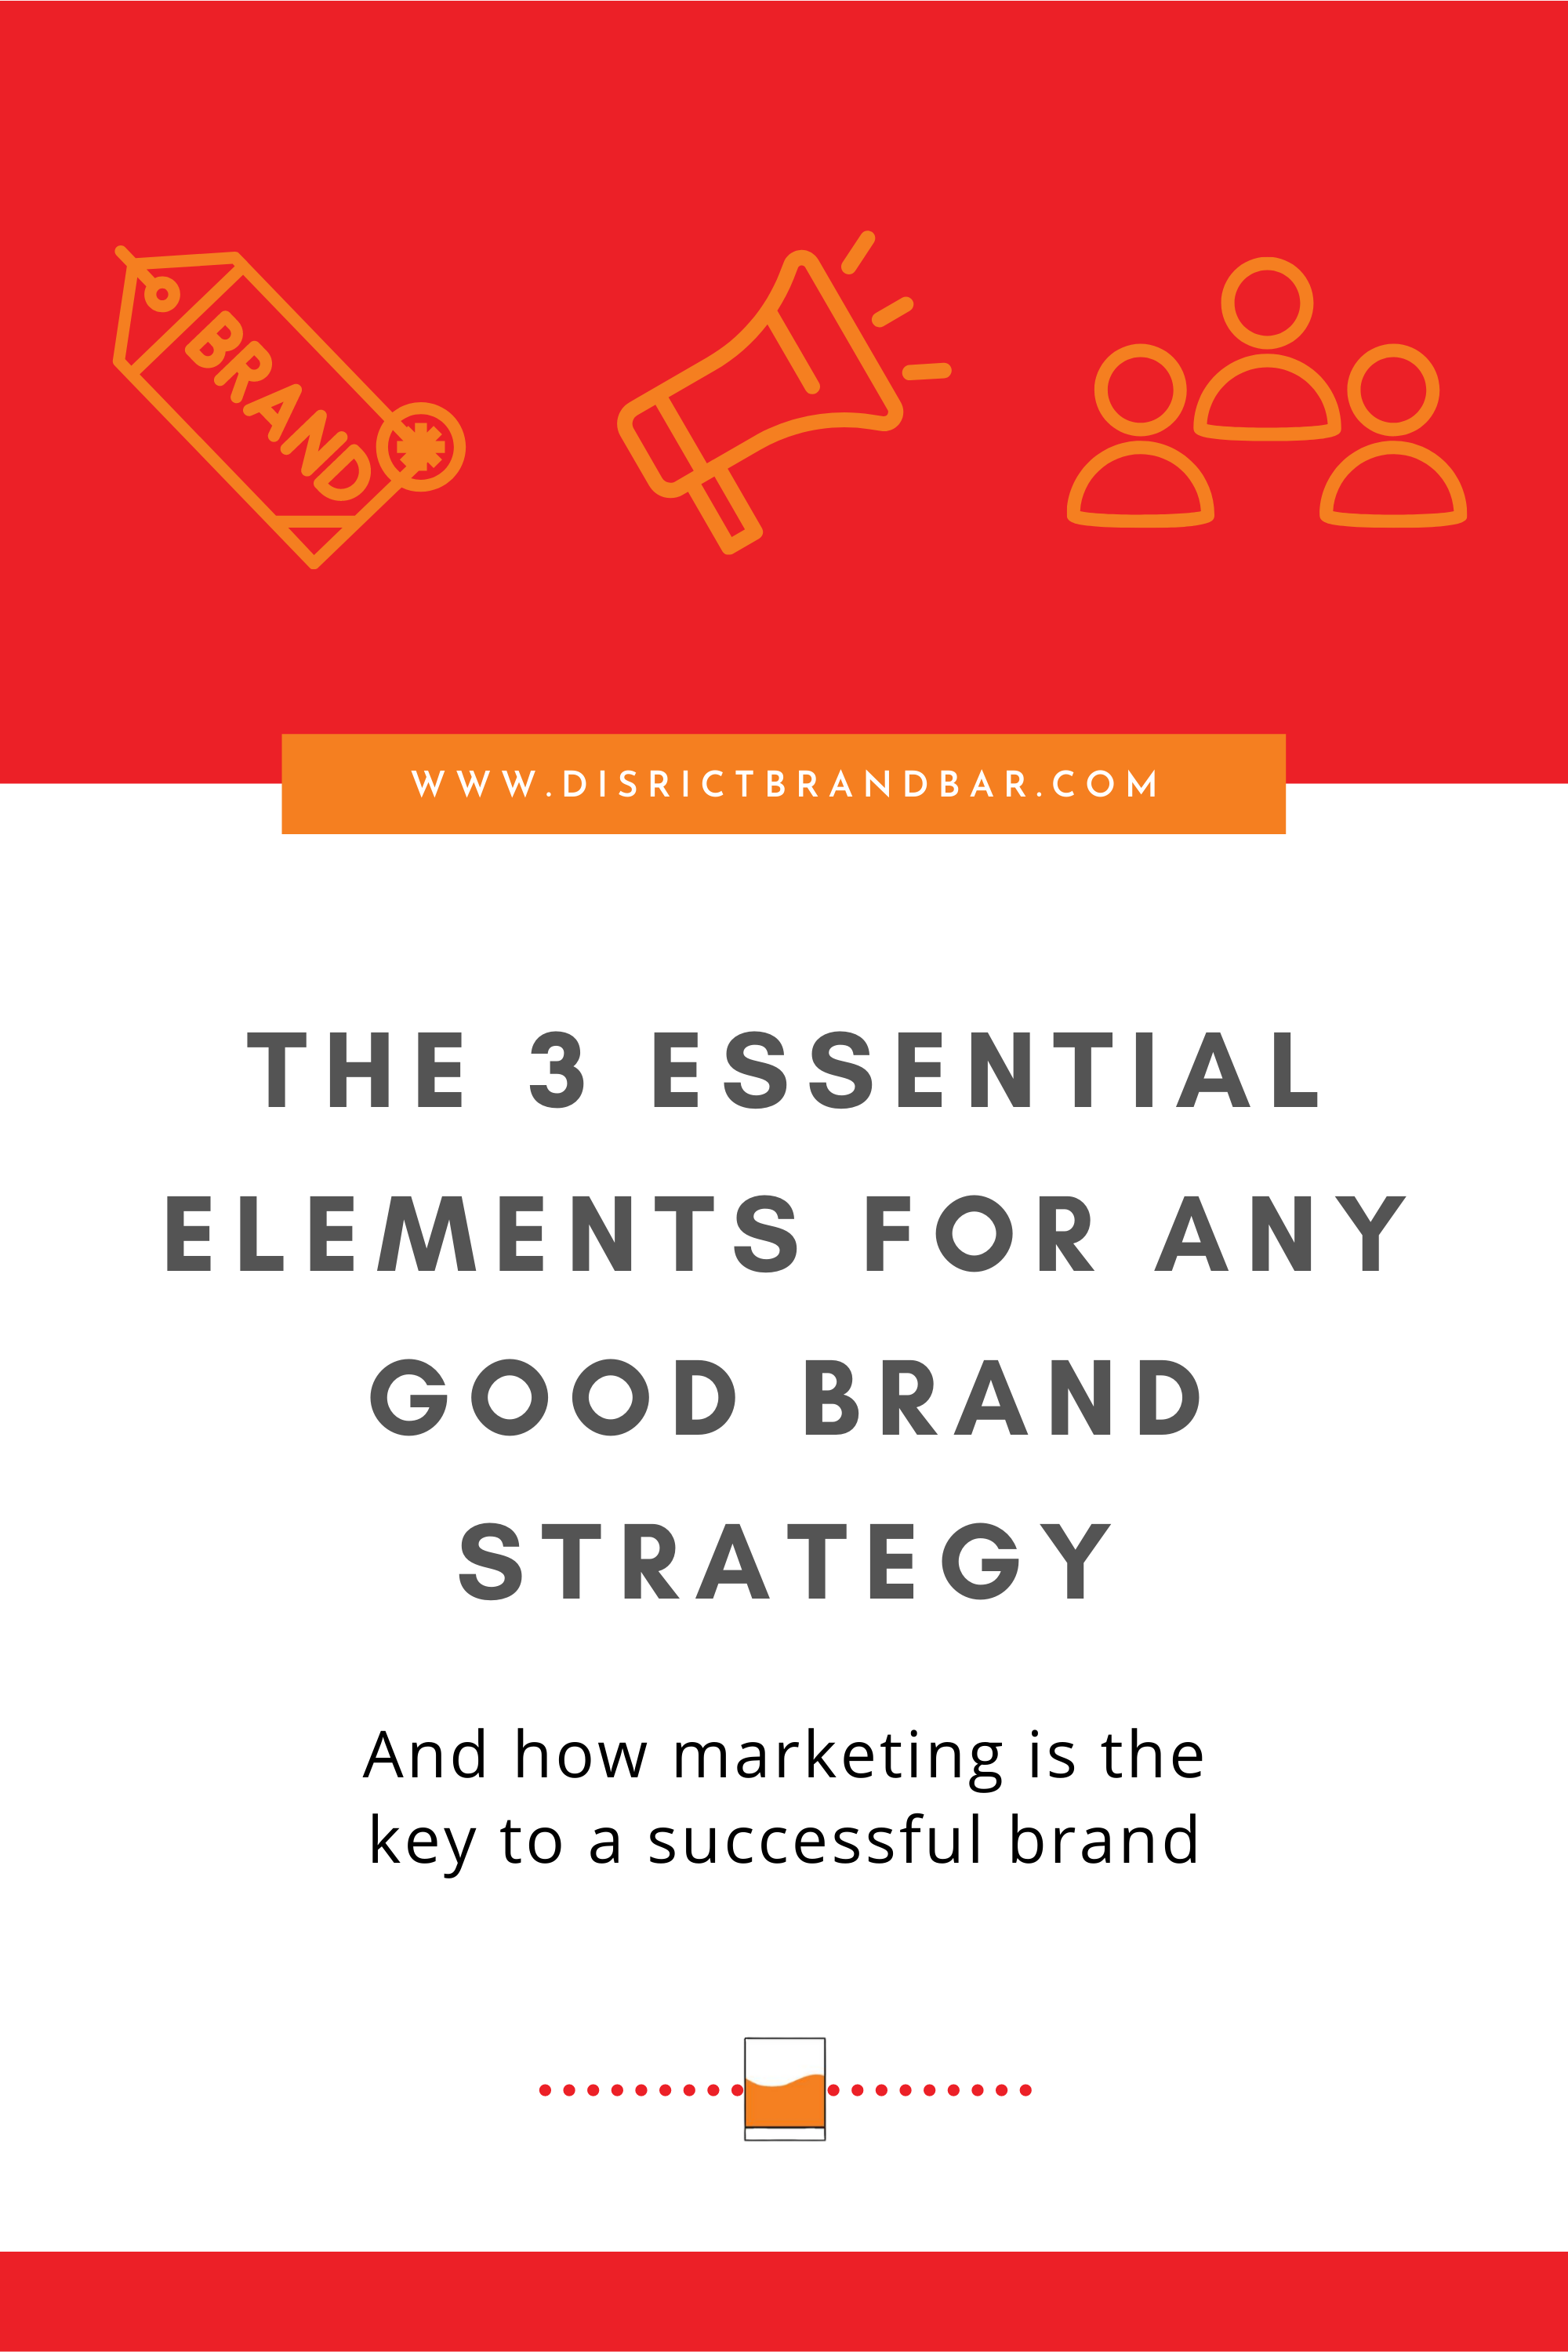 The 3 Elements for Any Good Brand Strategy